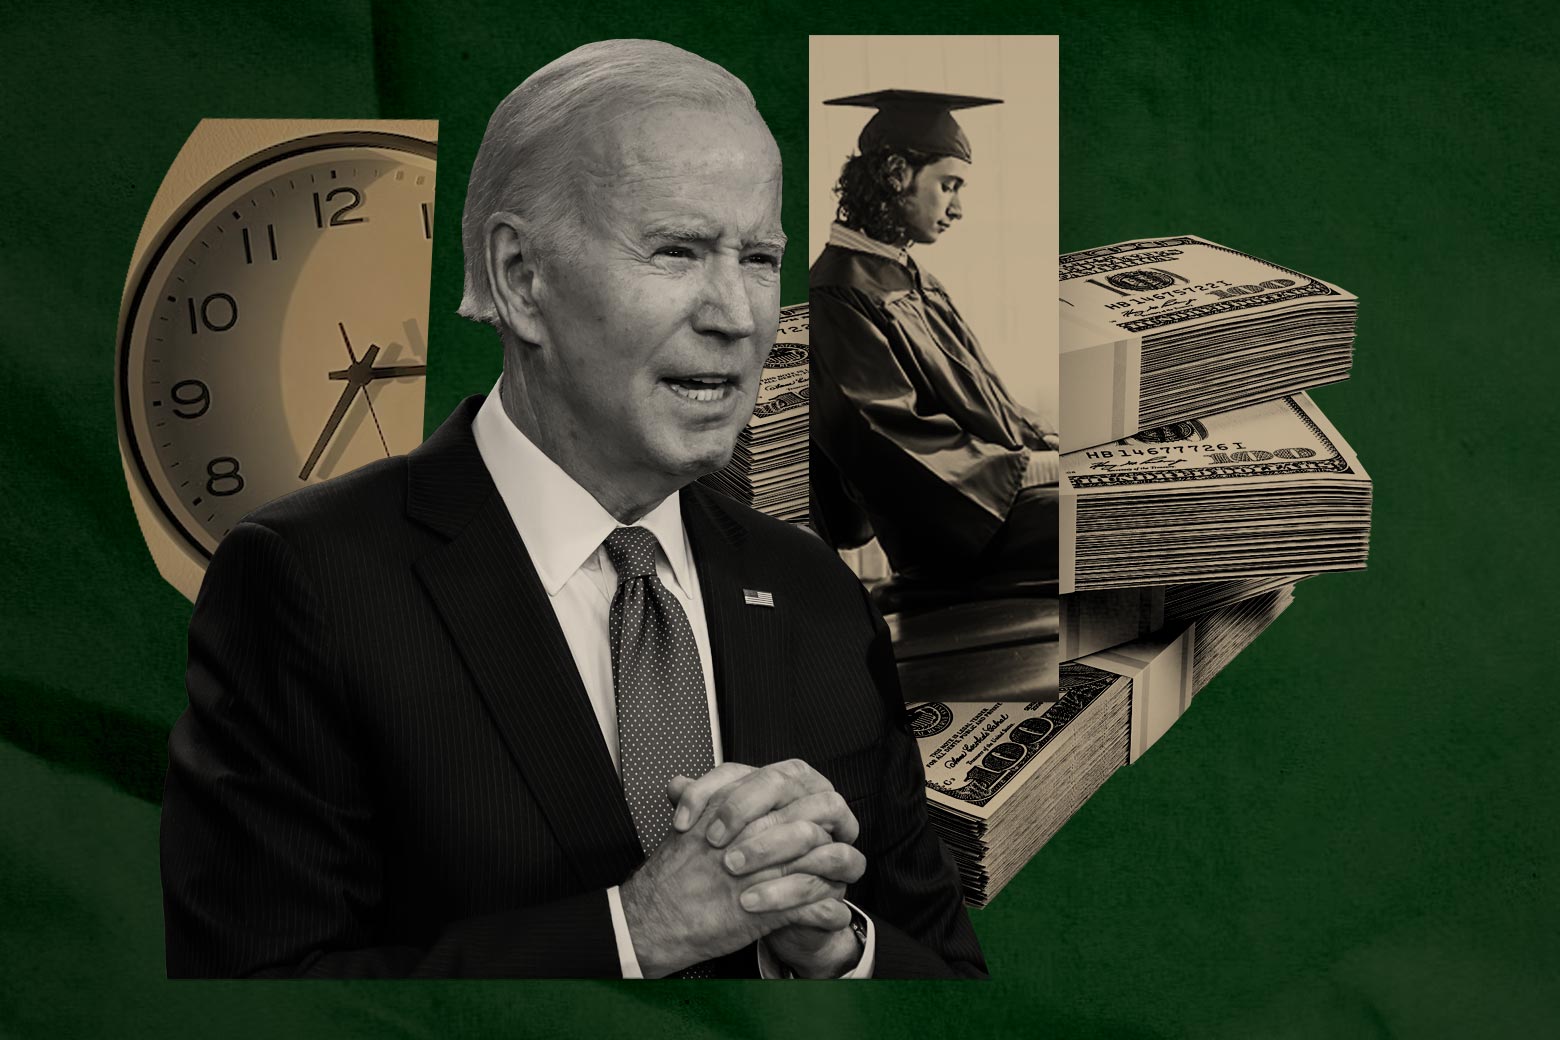 Cutout images of Biden, a graduating student, a pile of money, and a clock.